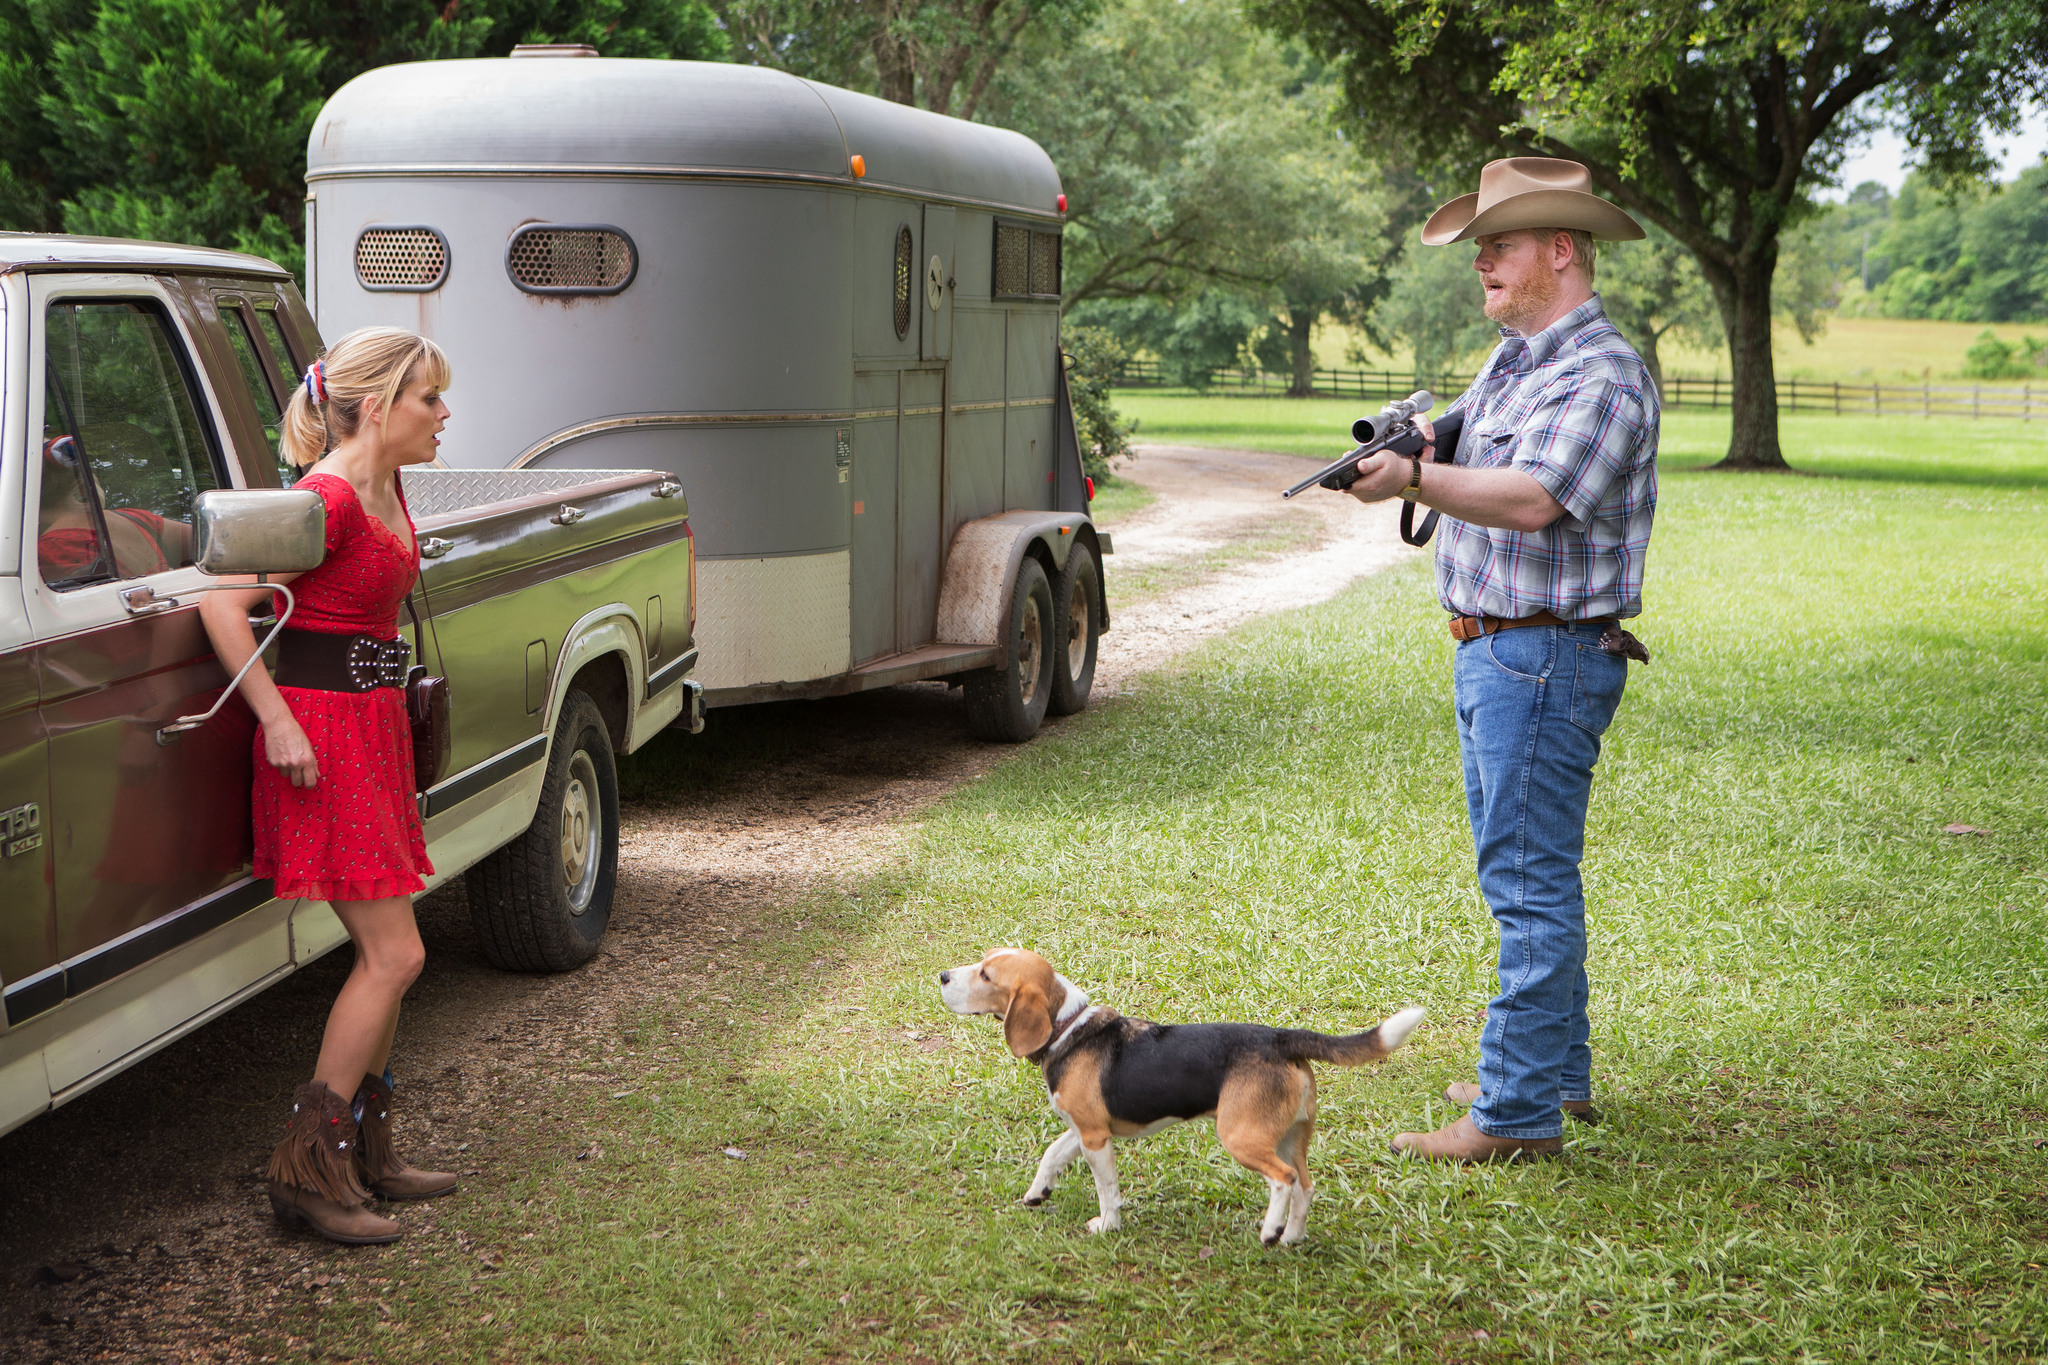 Still of Reese Witherspoon and Jim Gaffigan in Karstos gaudynes (2015)